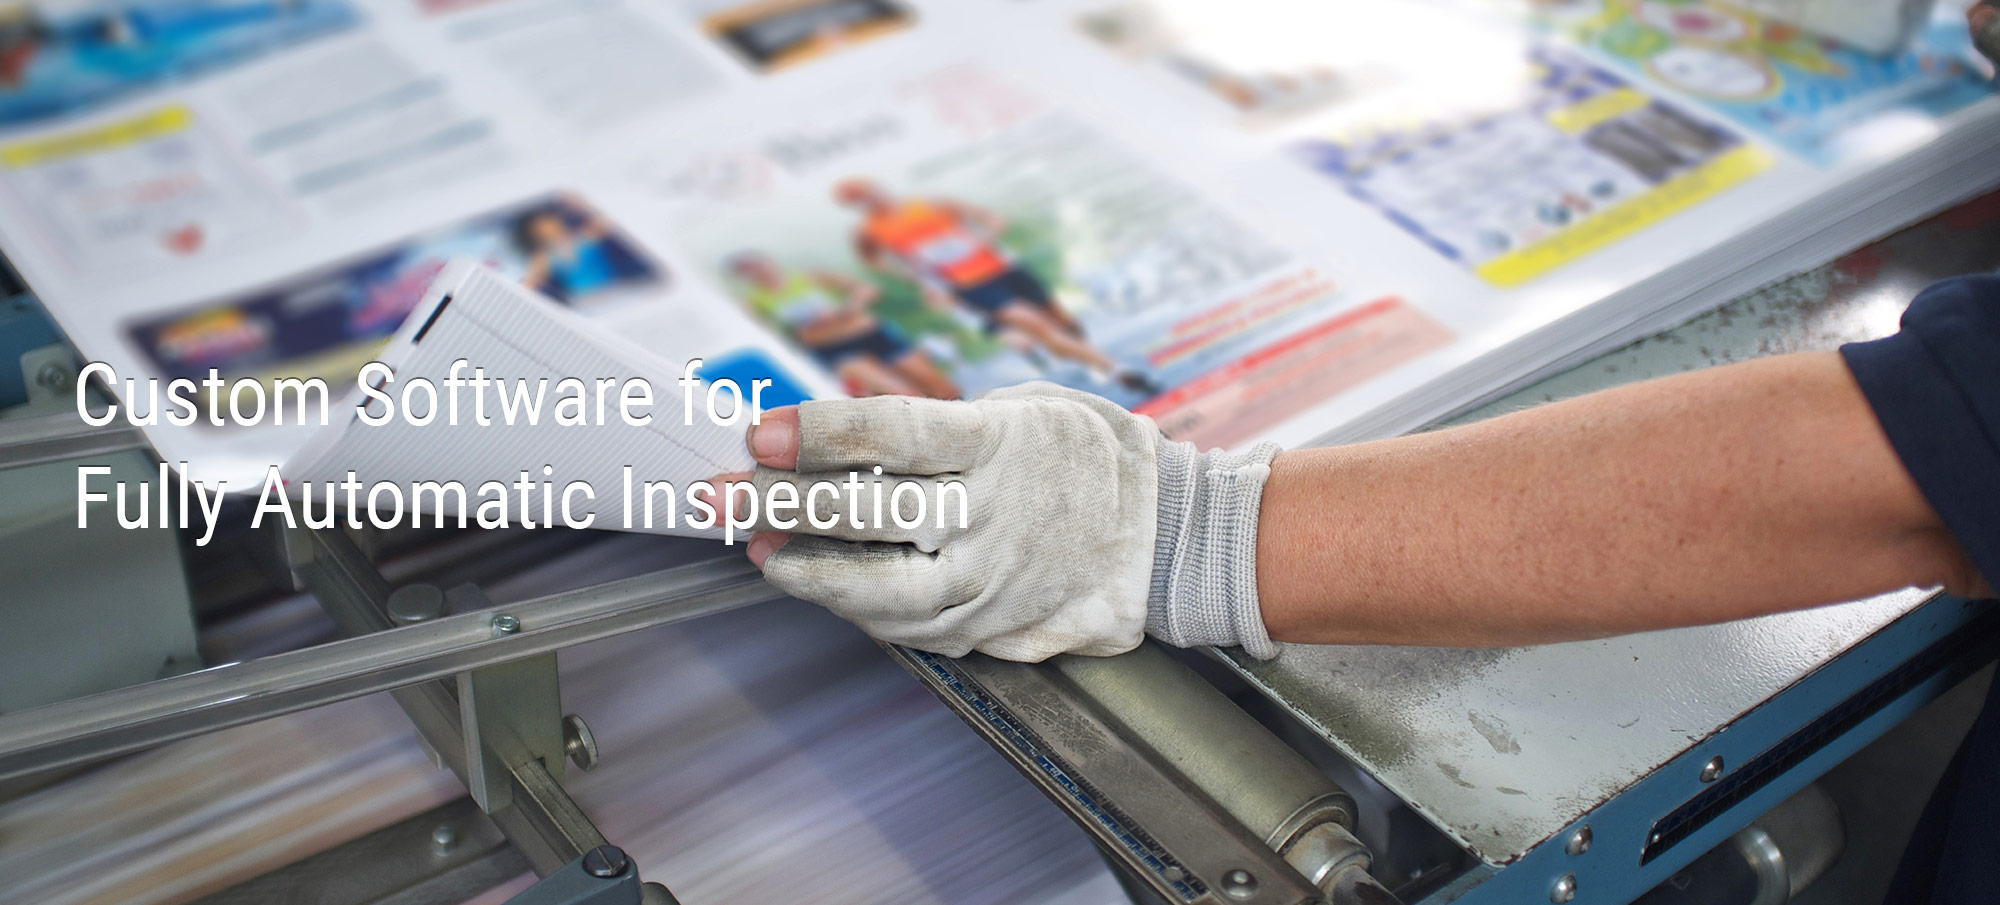 Custom software for fully automatic inspection